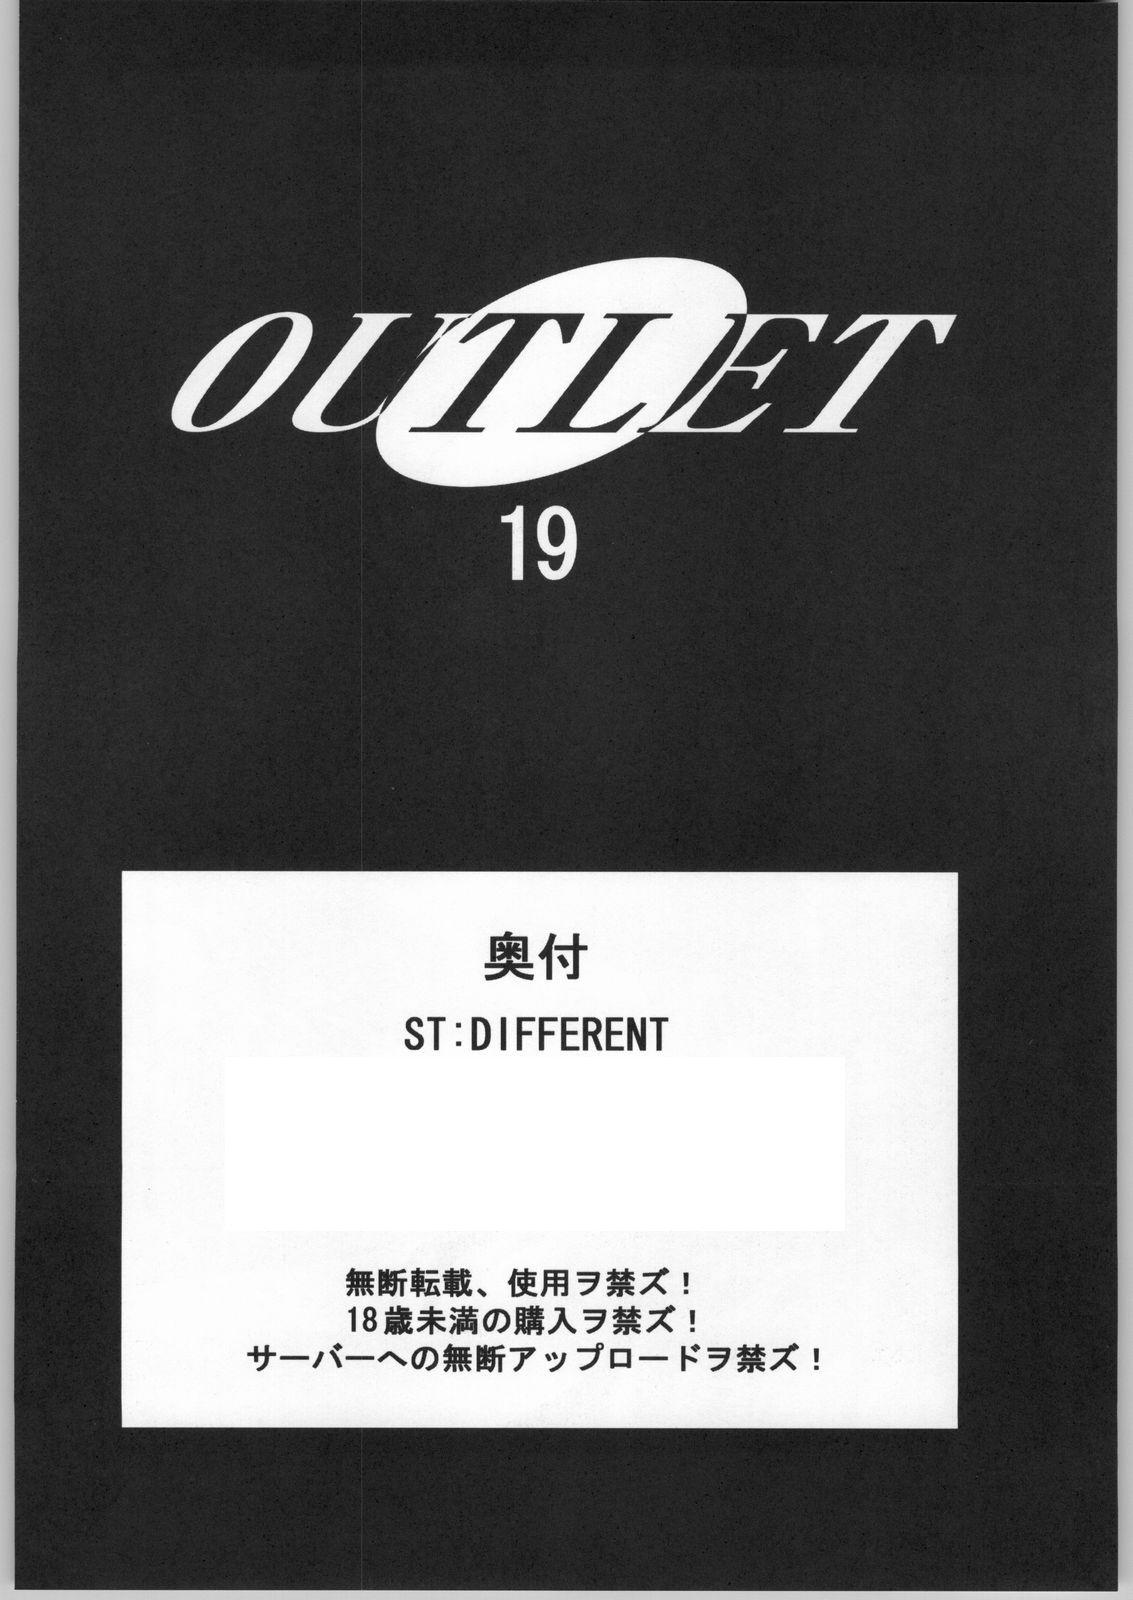 OUTLET 19 46